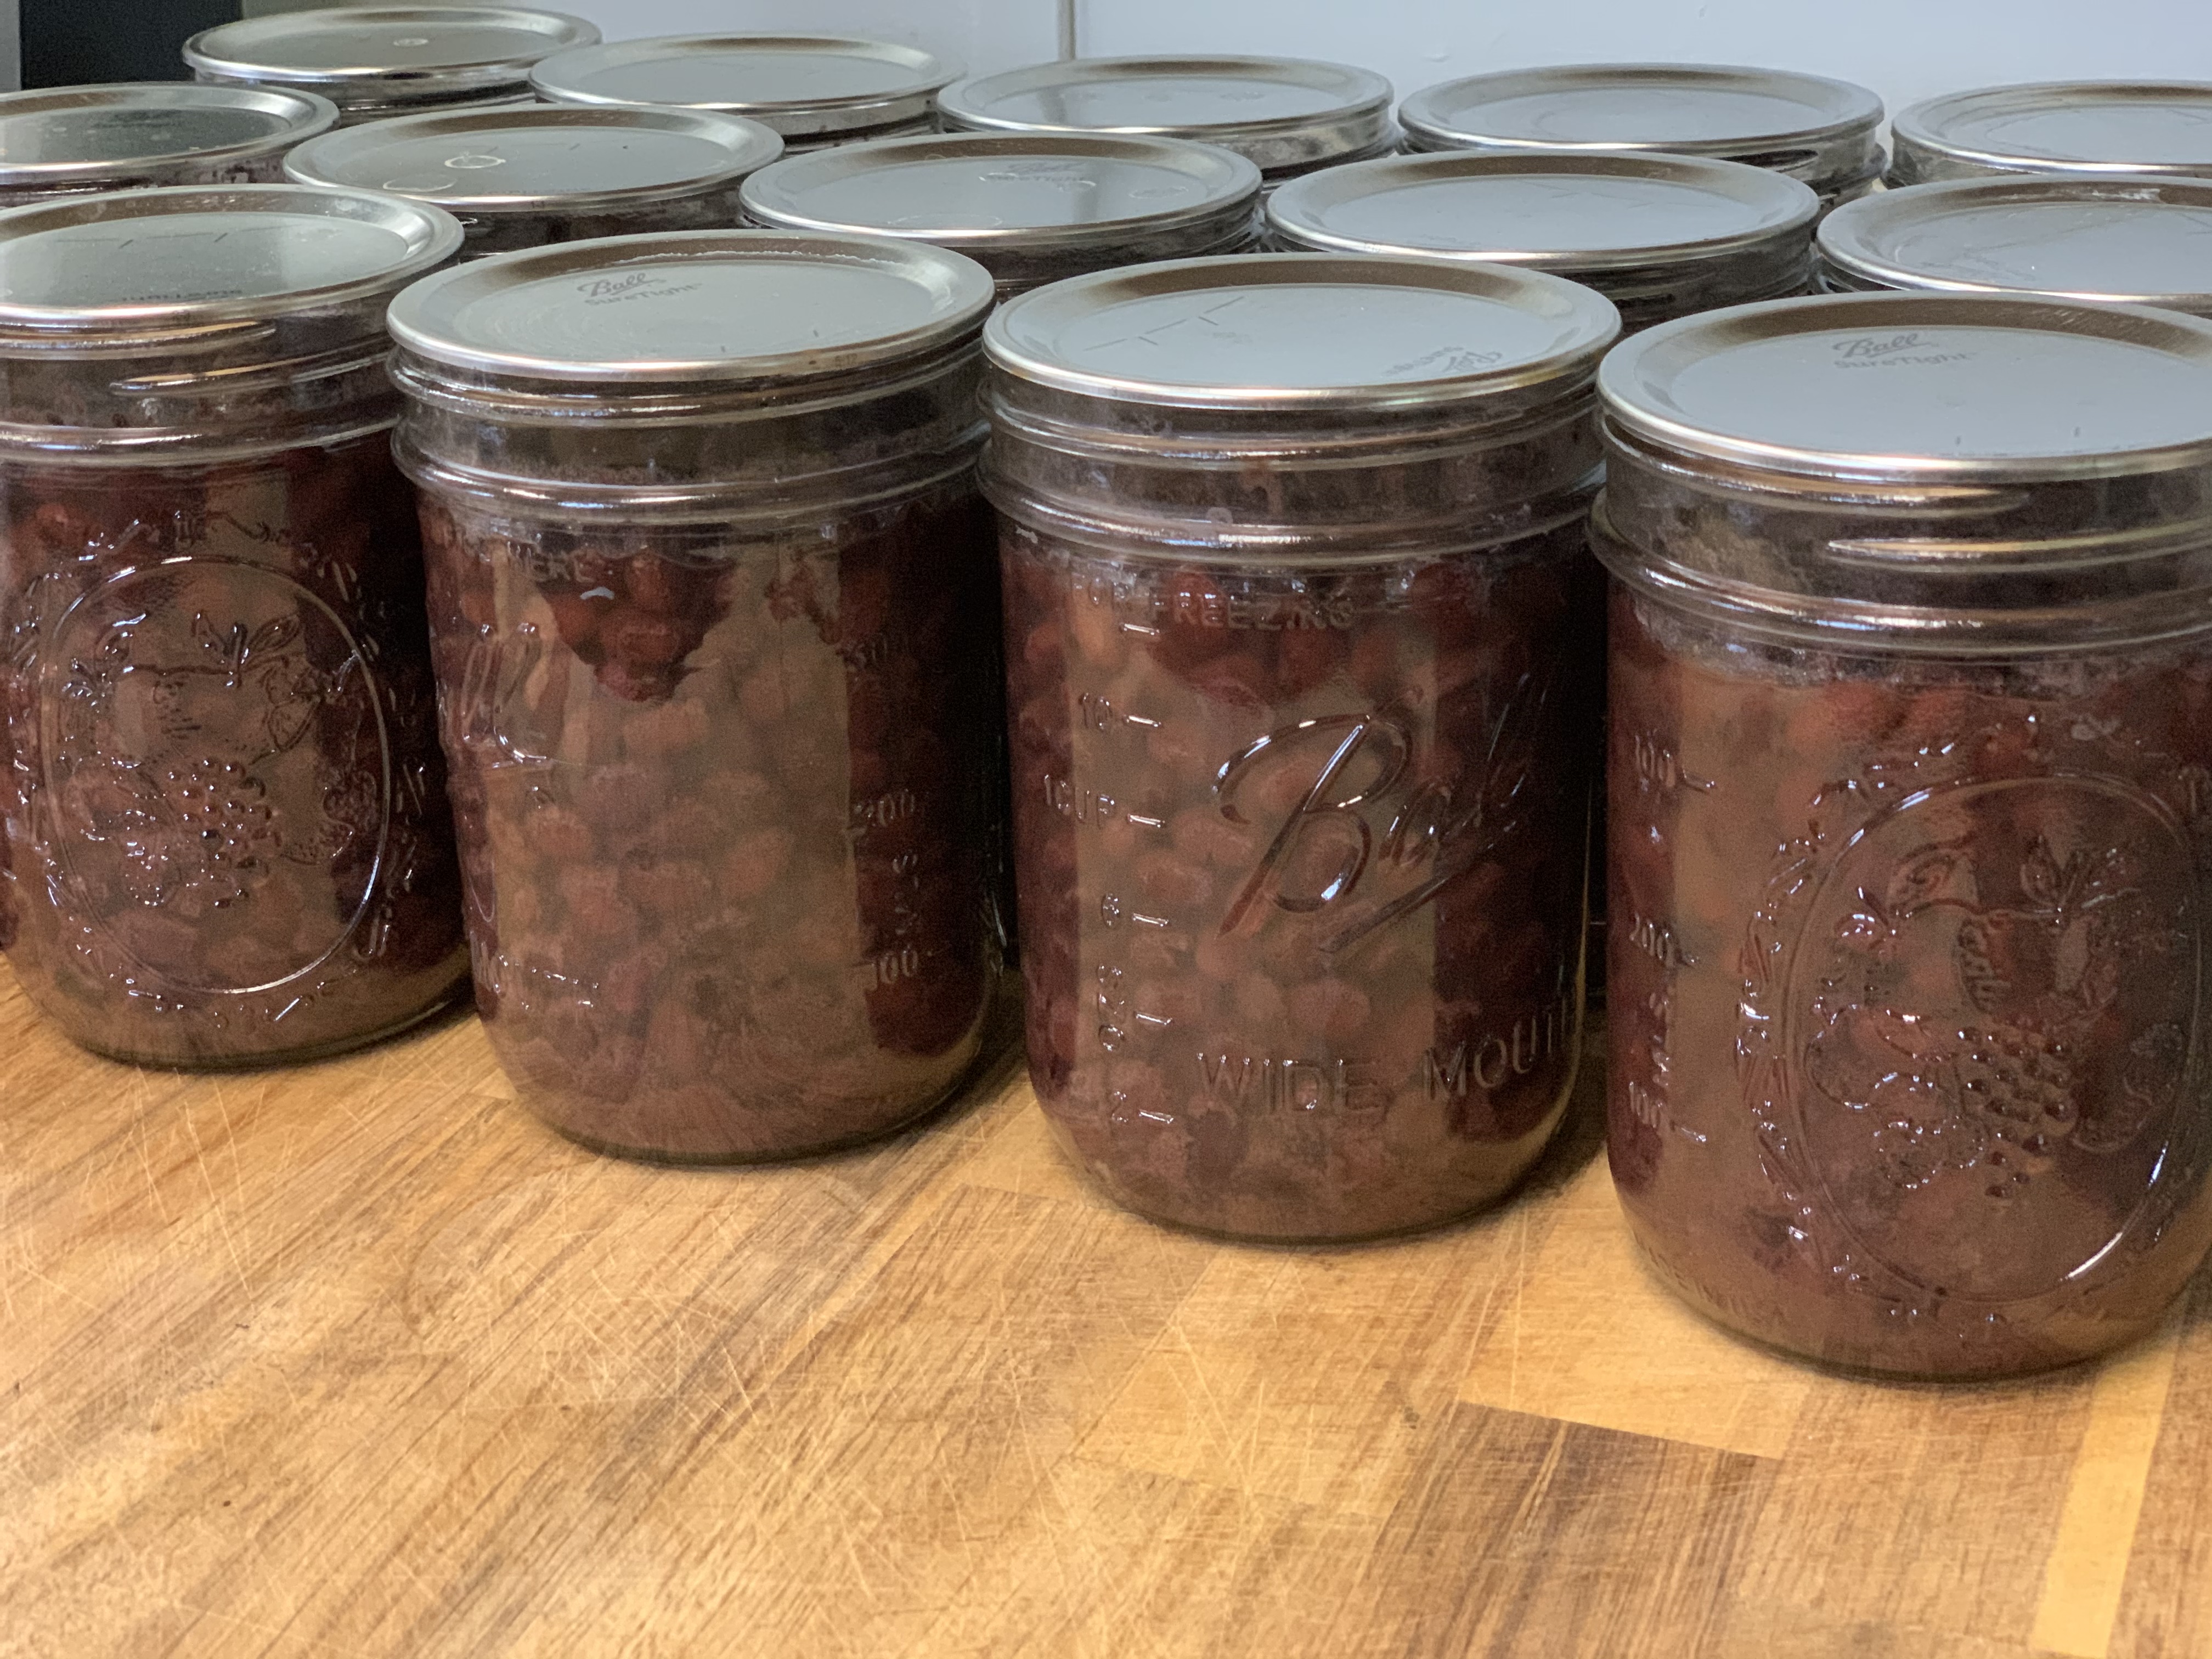 Pint sized Jars of Canned black beans